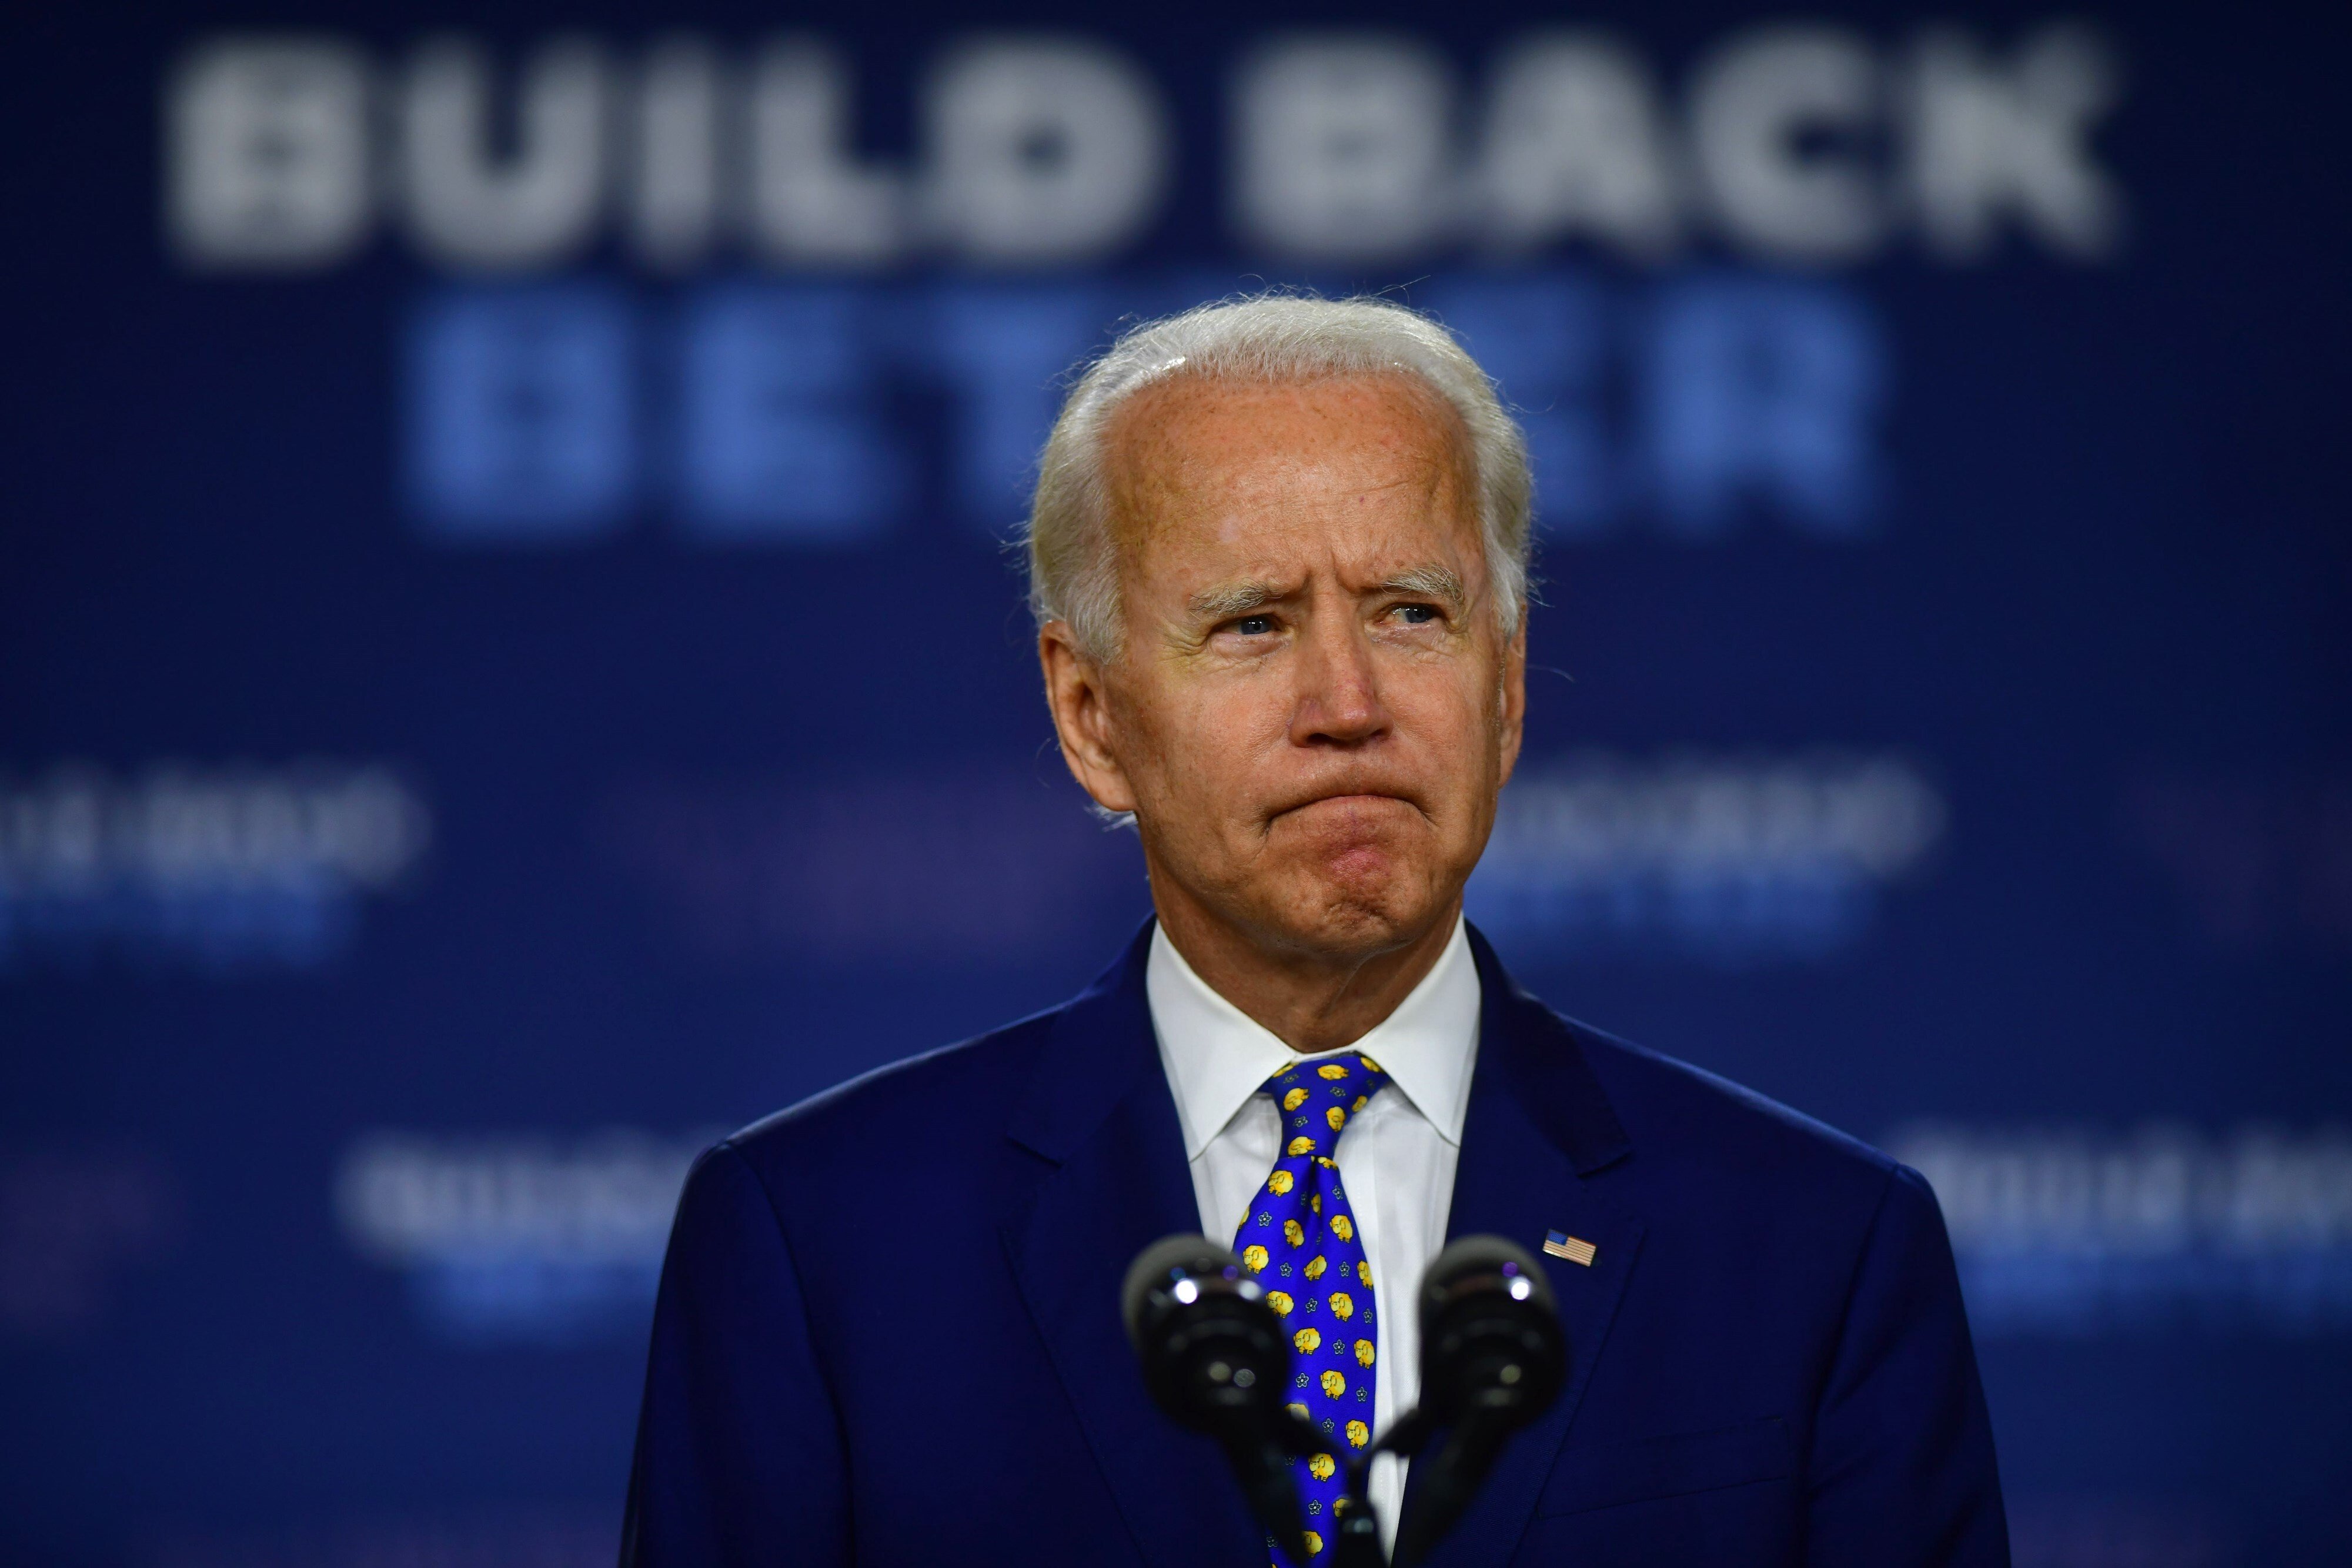 Joe Biden, then the presumptive Democratic Party presidential nominee, delivers a speech explaining his “Build Back Better” plan, at a community centre in Wilmington, Delaware, on July 28. Photo: Getty Images/AFP